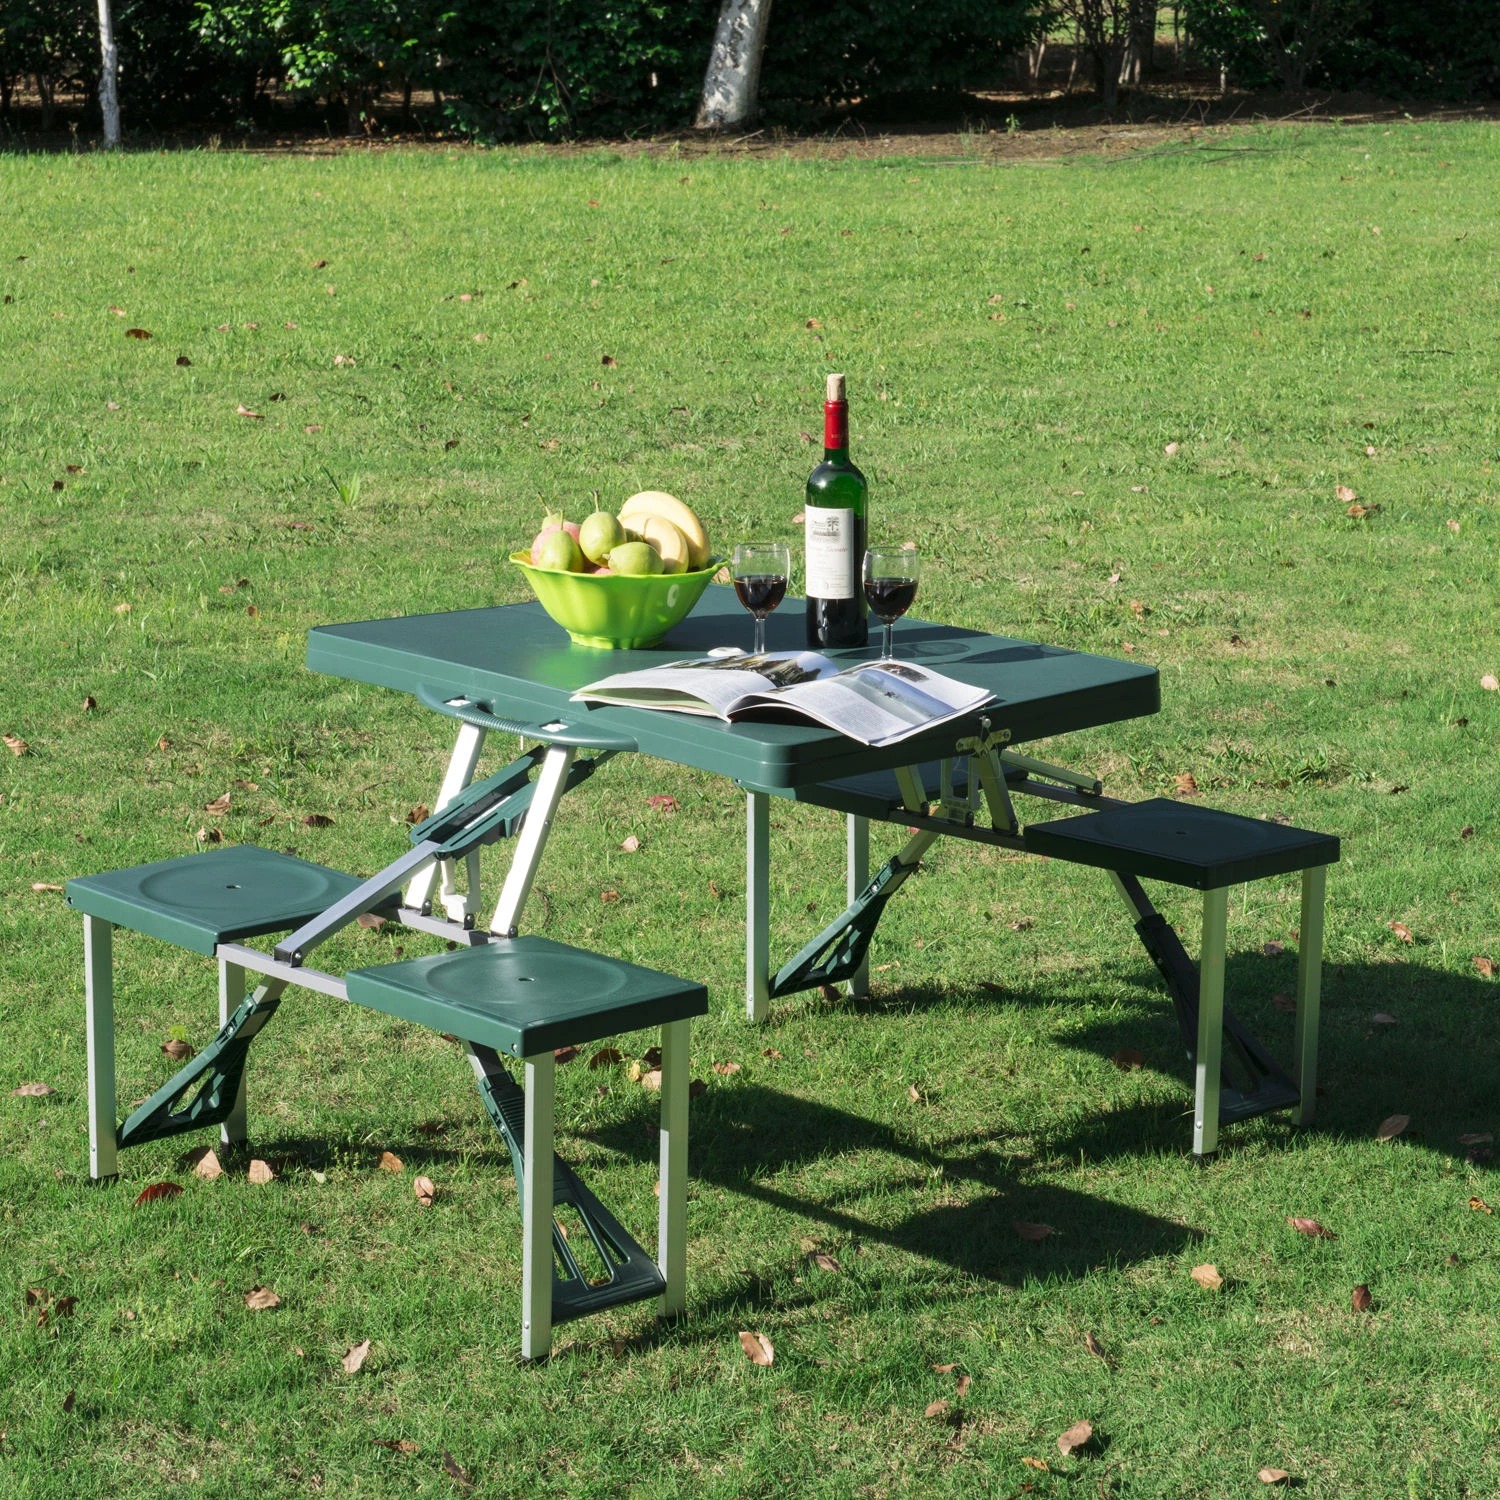 4 Person Plastic Portable Compact Folding Suitcase Picnic Table Set with Umbrella Hole - Green